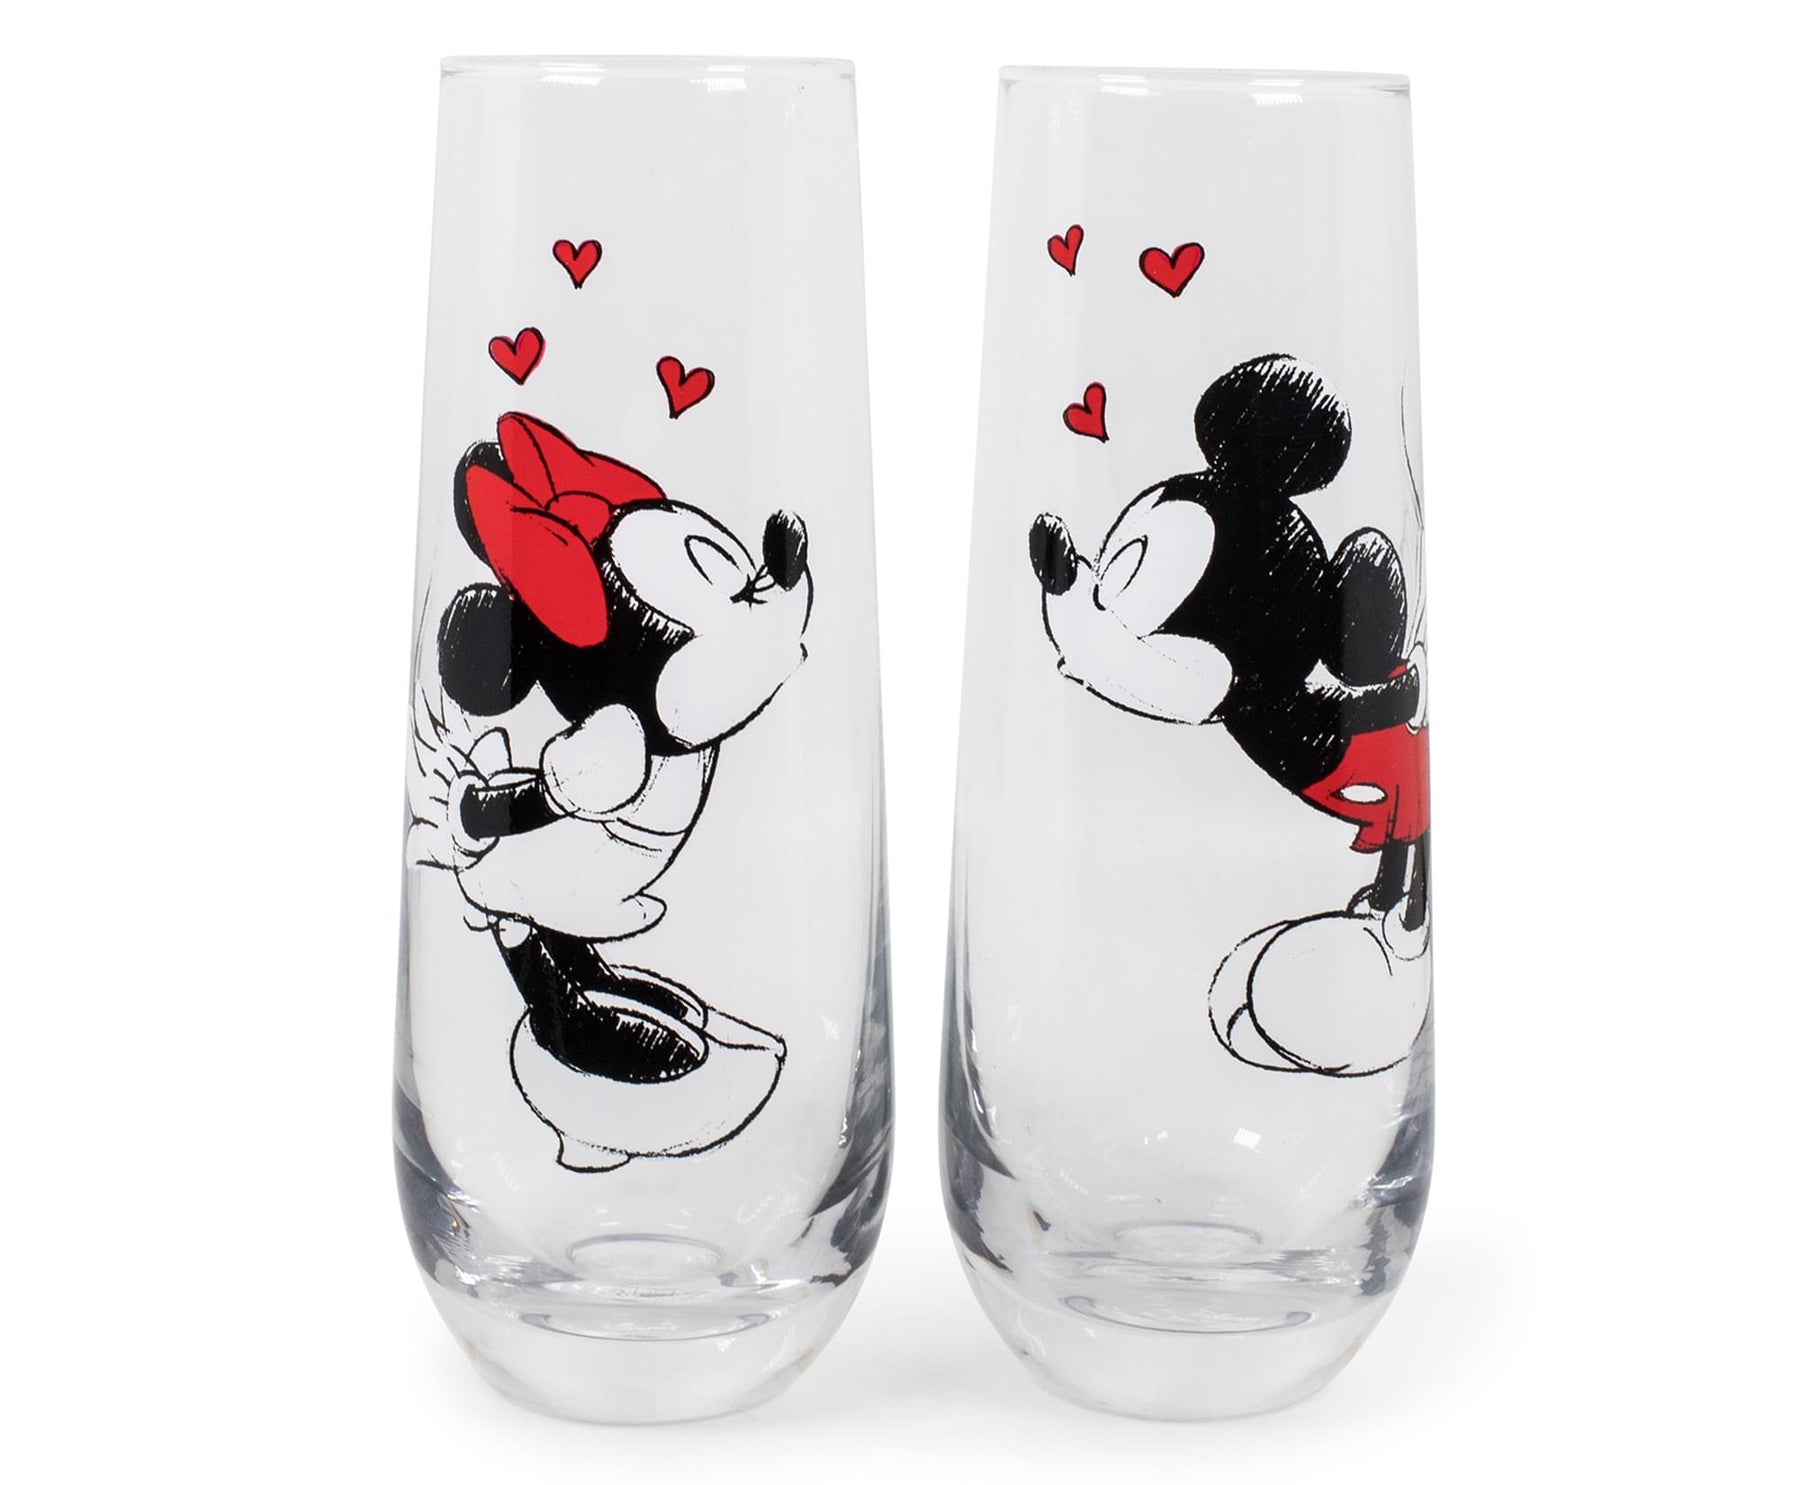 Mickey and Minnie Kiss Hearts 2pc Stemless Fluted Glass Set